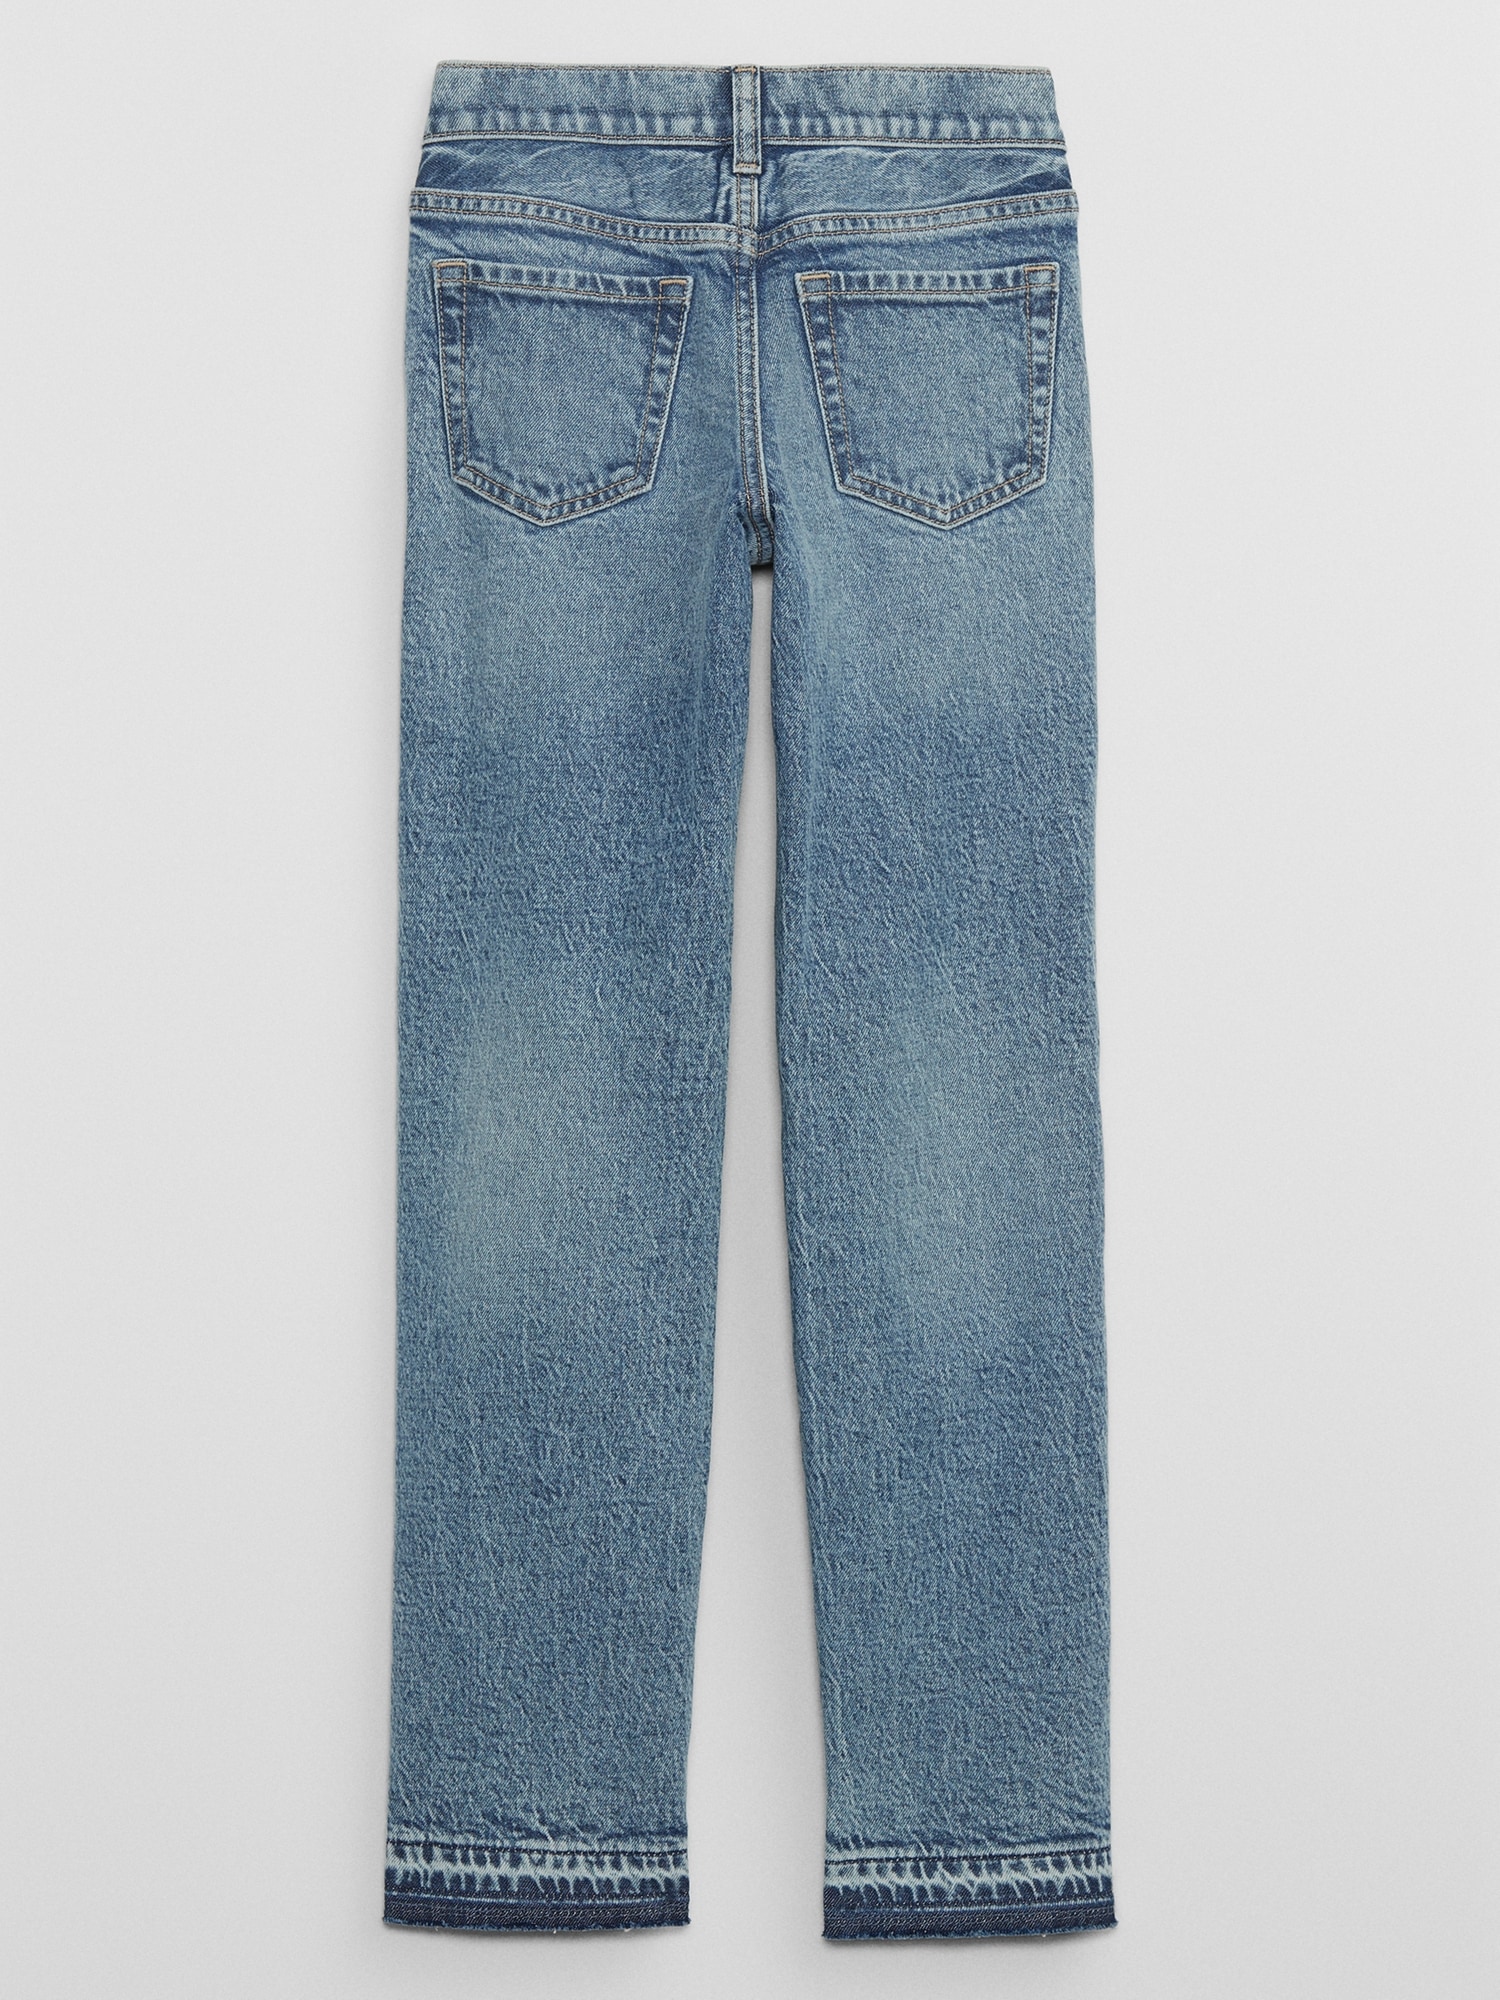 Buy Gap Mid Rise Straight Jeans with Washwell from the Gap online shop